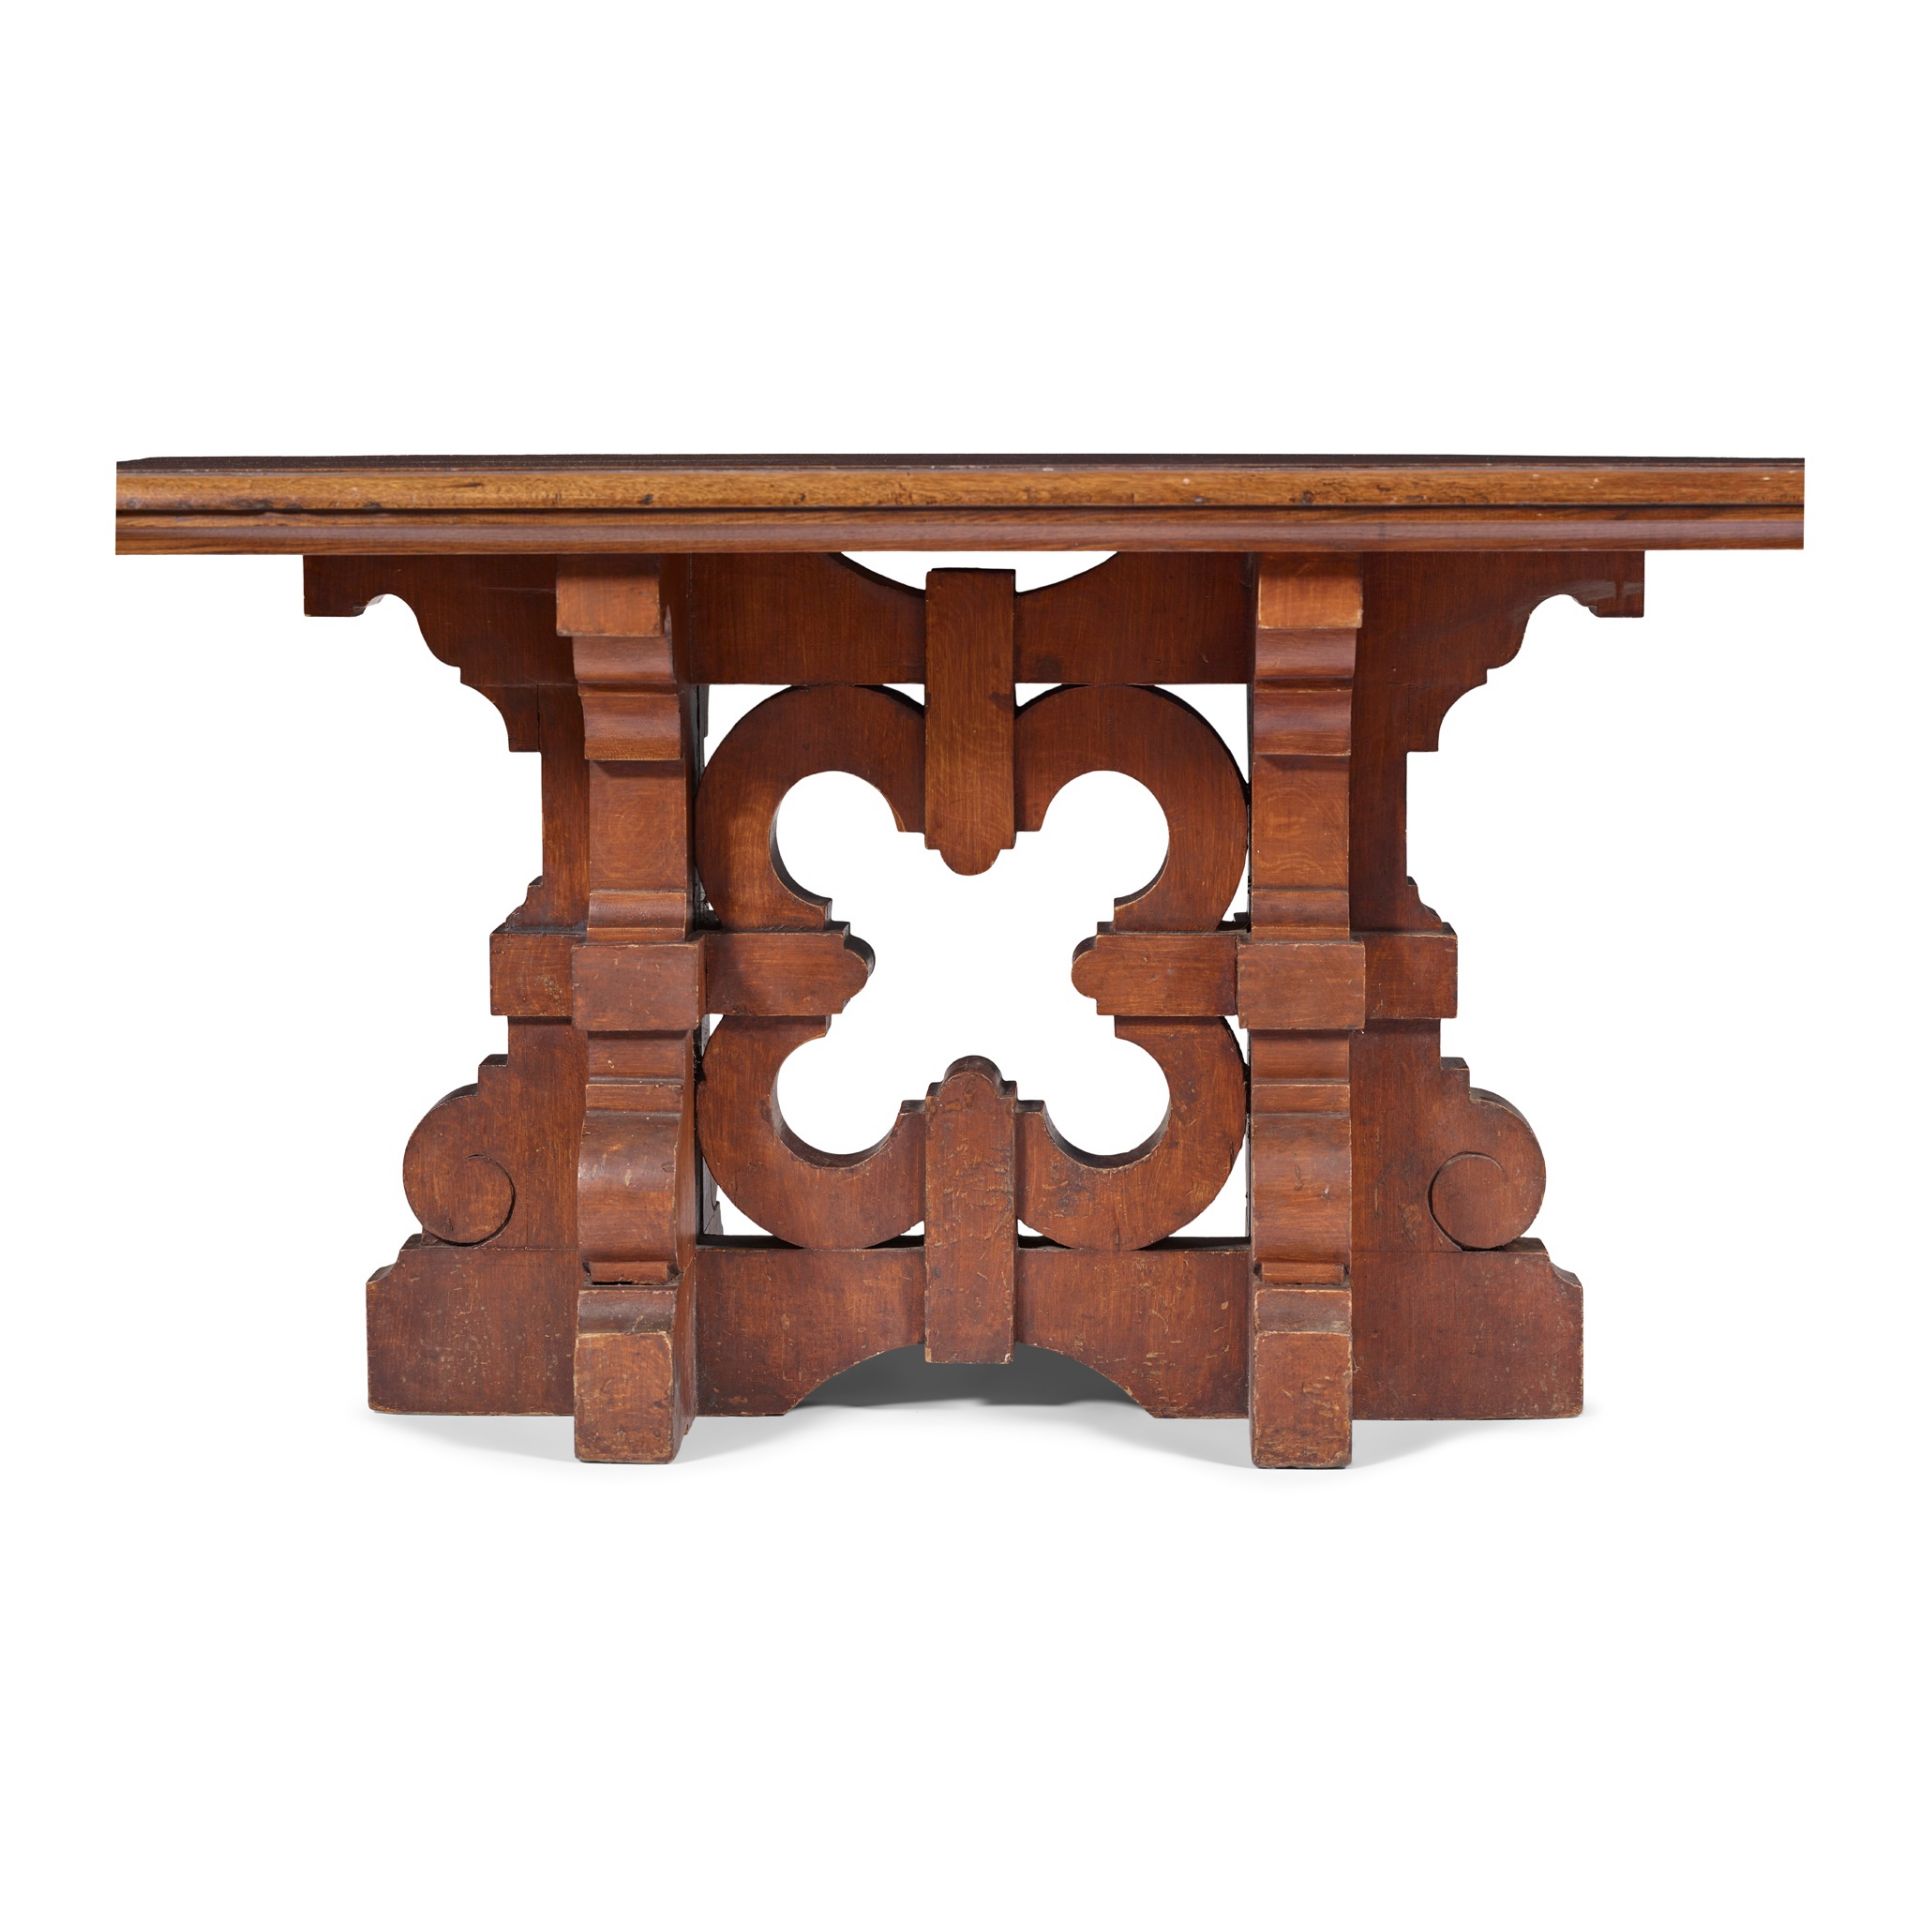 ENGLISH GOTHIC REVIVAL CENTRE TABLE, CIRCA 1870 - Image 2 of 4